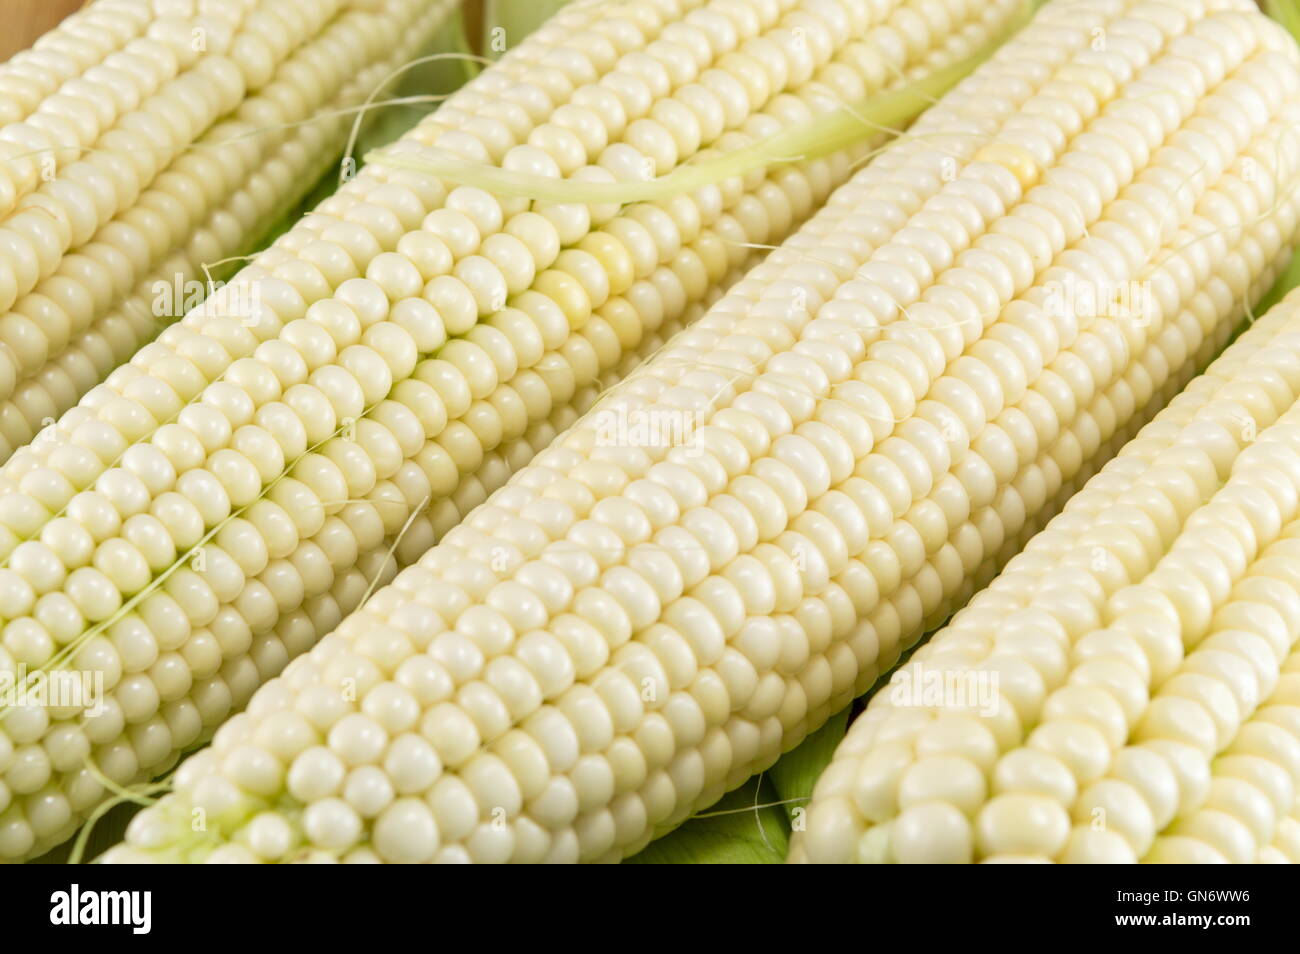 Freshly picked corn cobs in a row Stock Photo